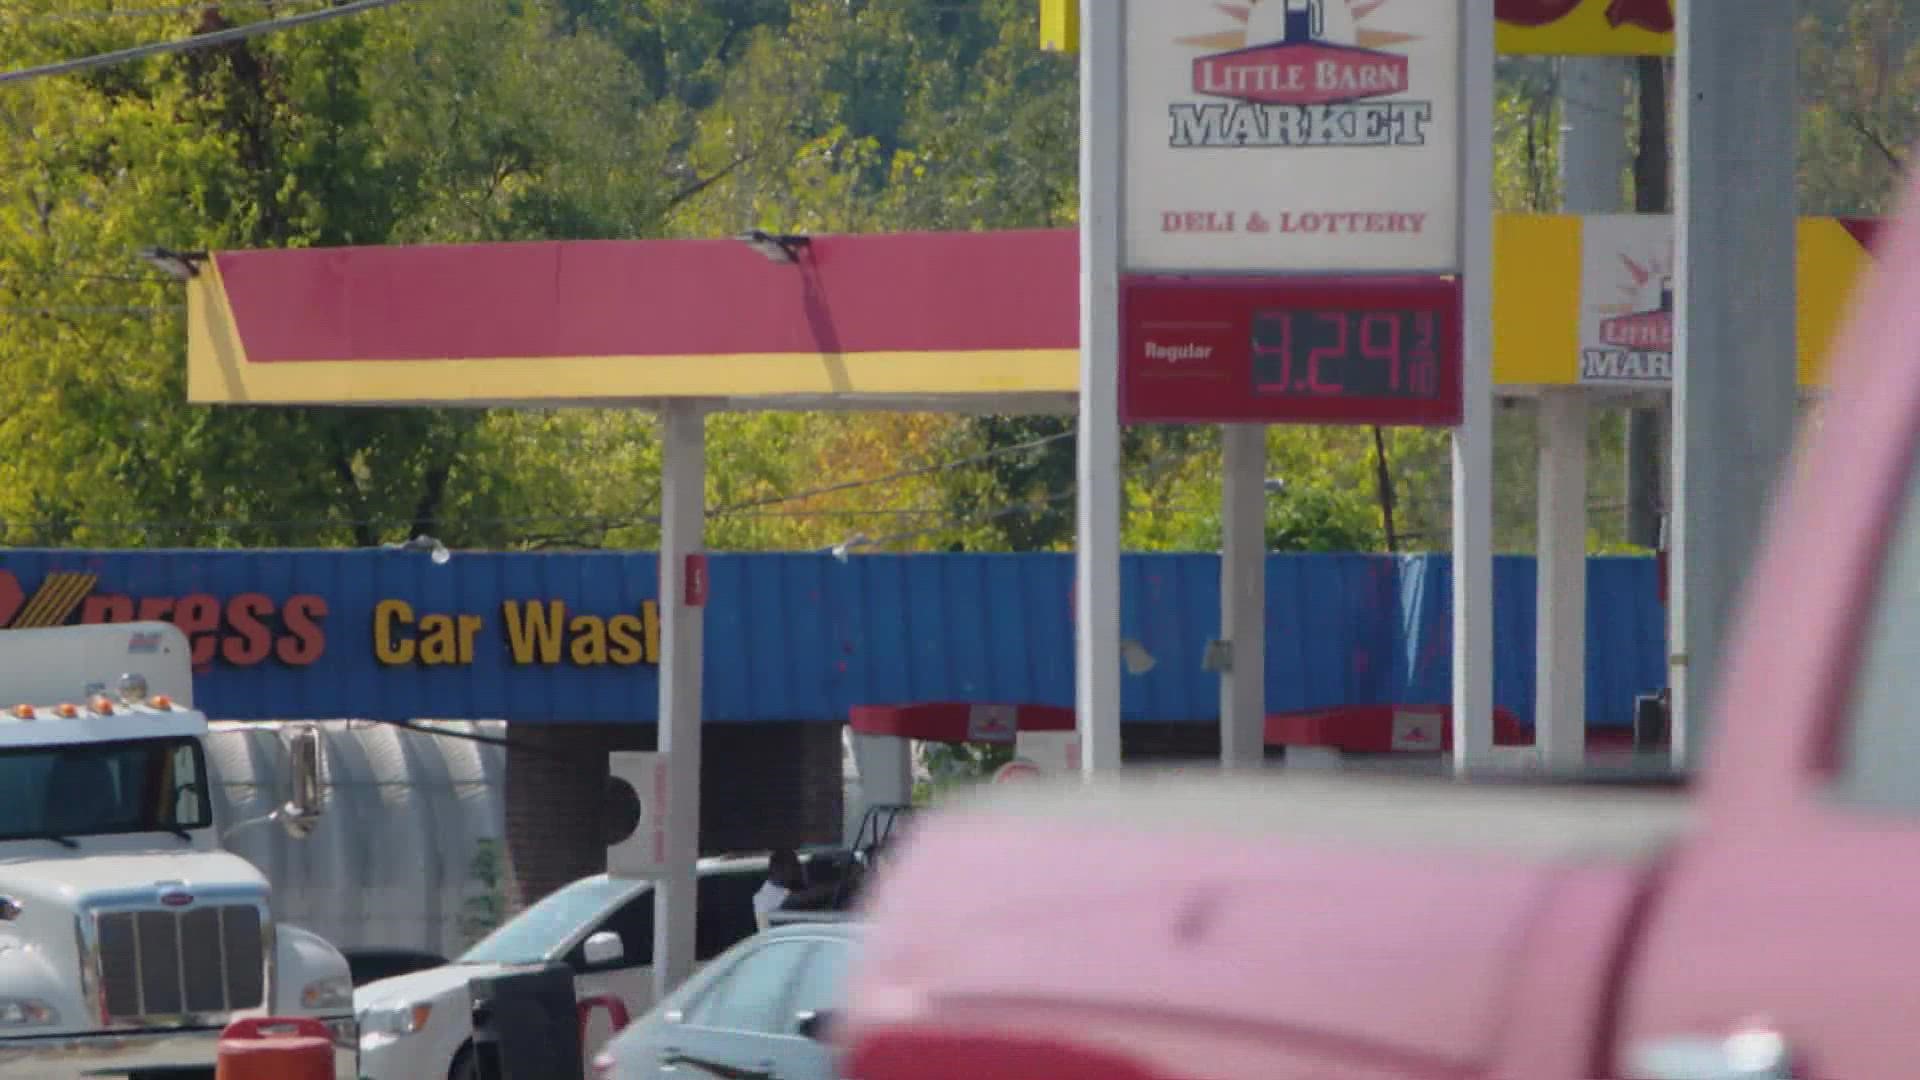 Experts said prices could climb up to 30 cents more per gallon.